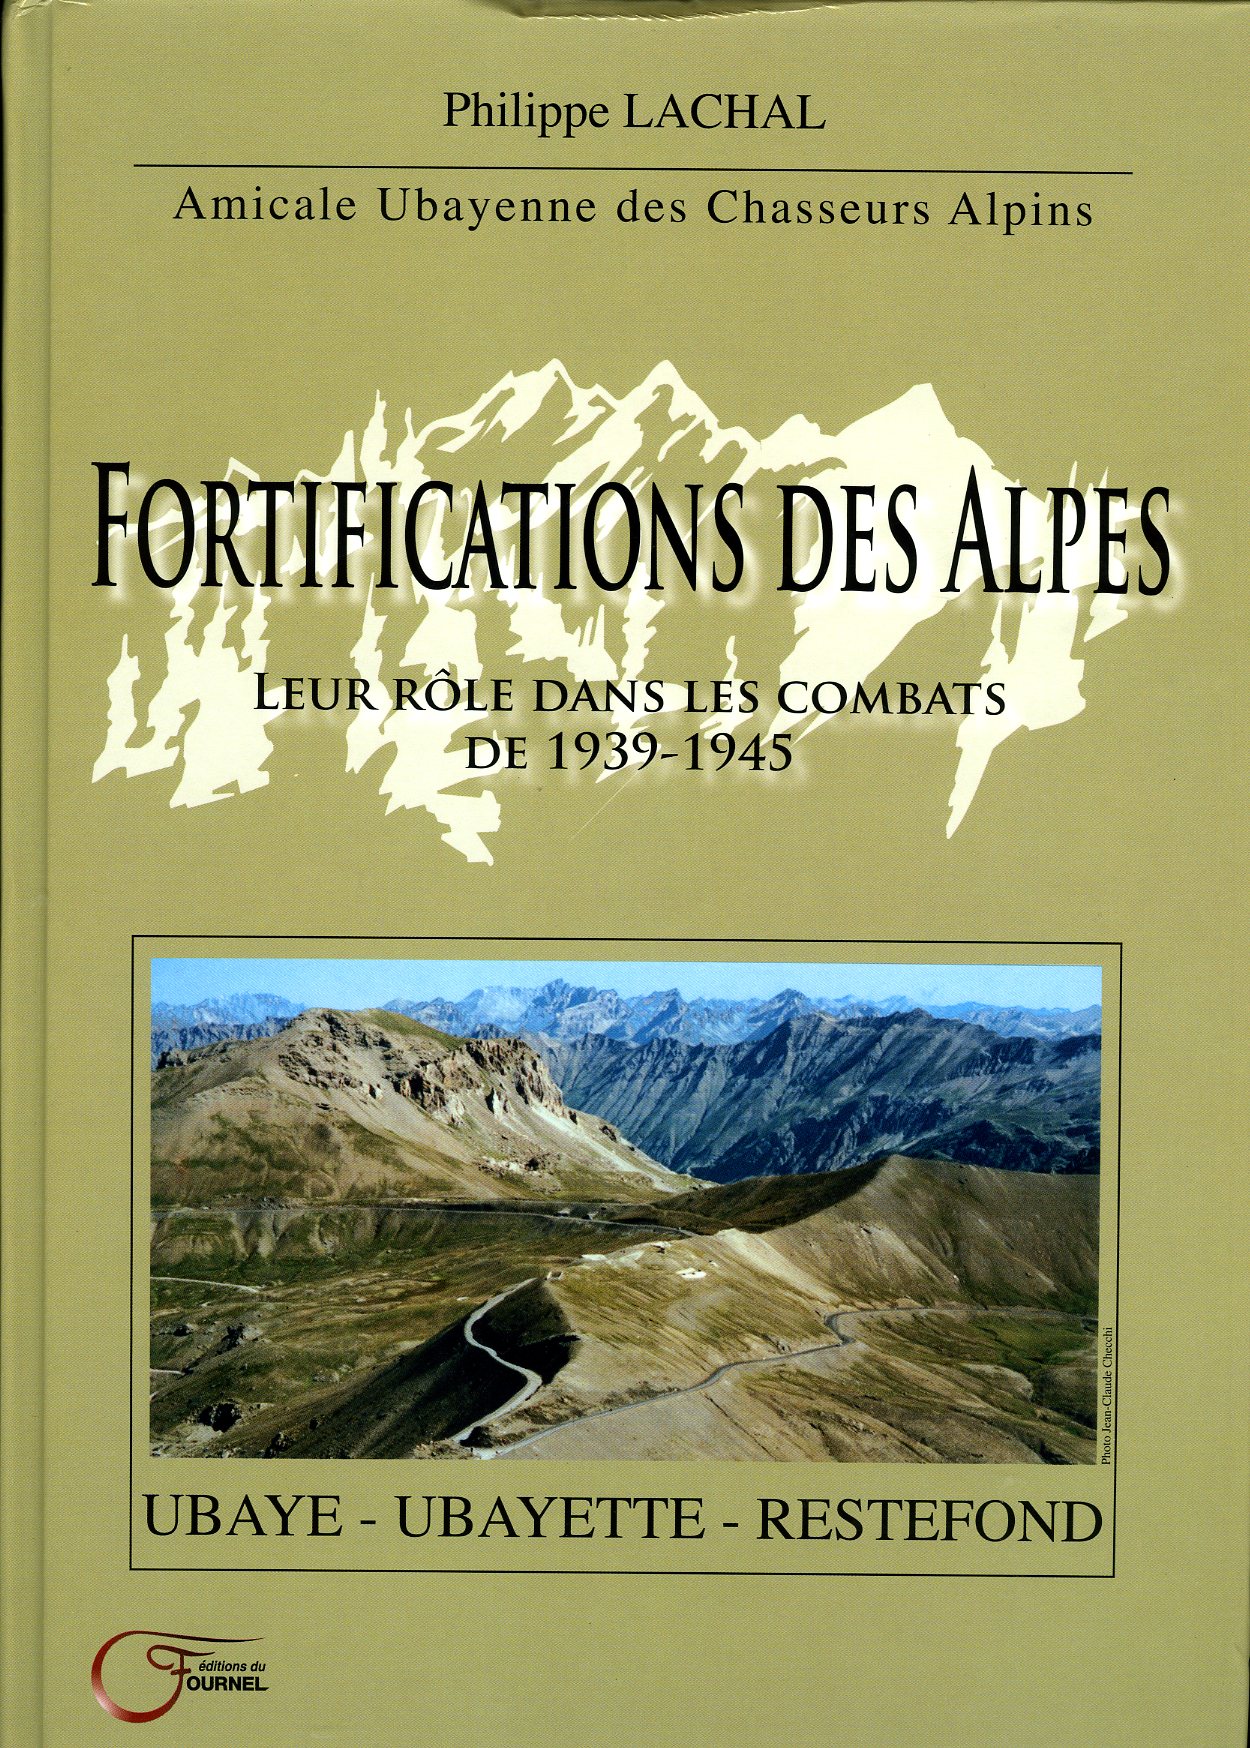 Ligne Maginot - Fortifications des Alpes - Ubaye-Ubayette-Restefond (LACHAL, Philippe) - LACHAL, Philippe